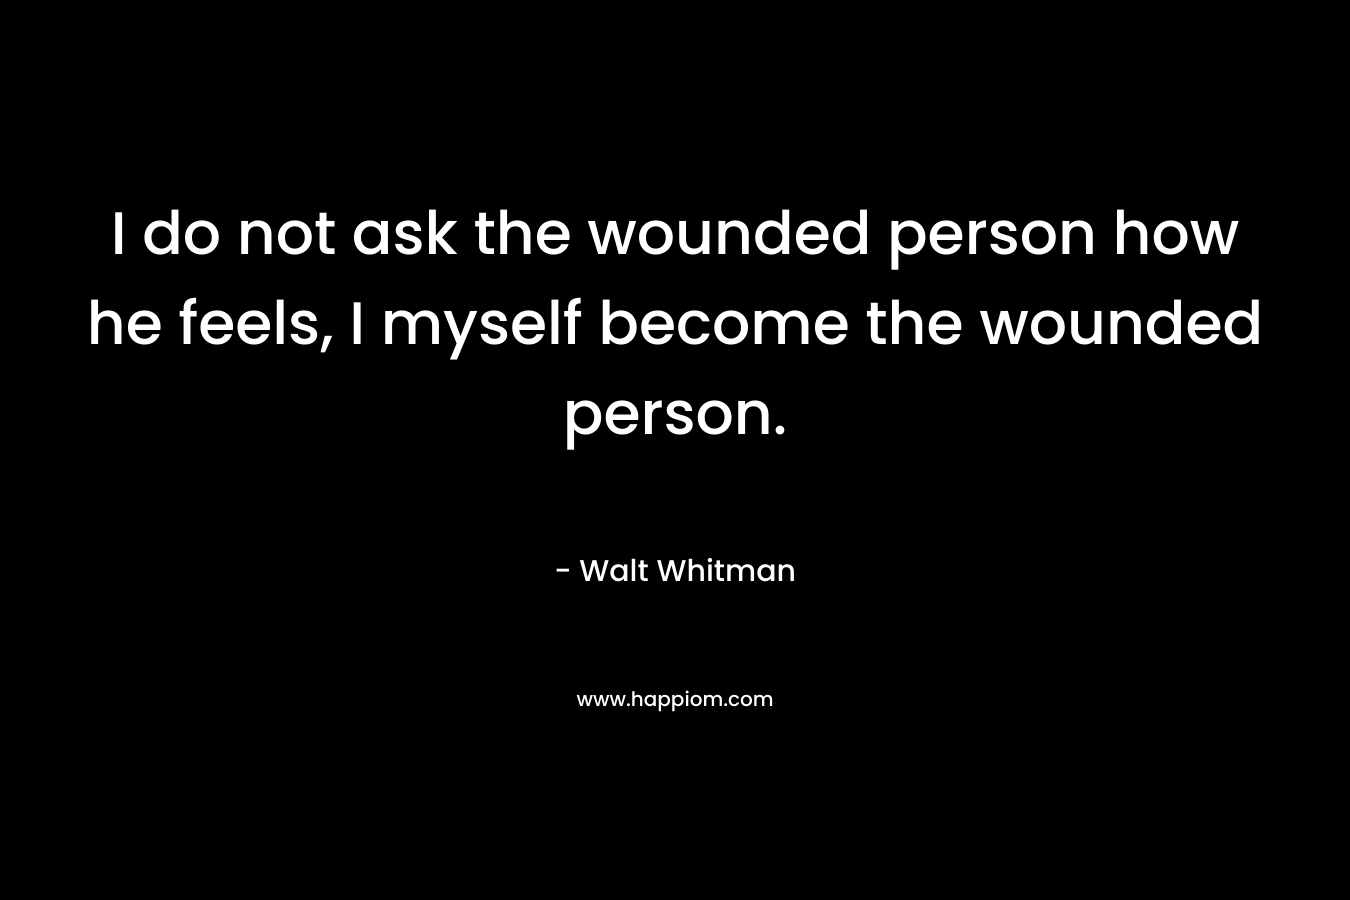 I do not ask the wounded person how he feels, I myself become the wounded person. – Walt Whitman